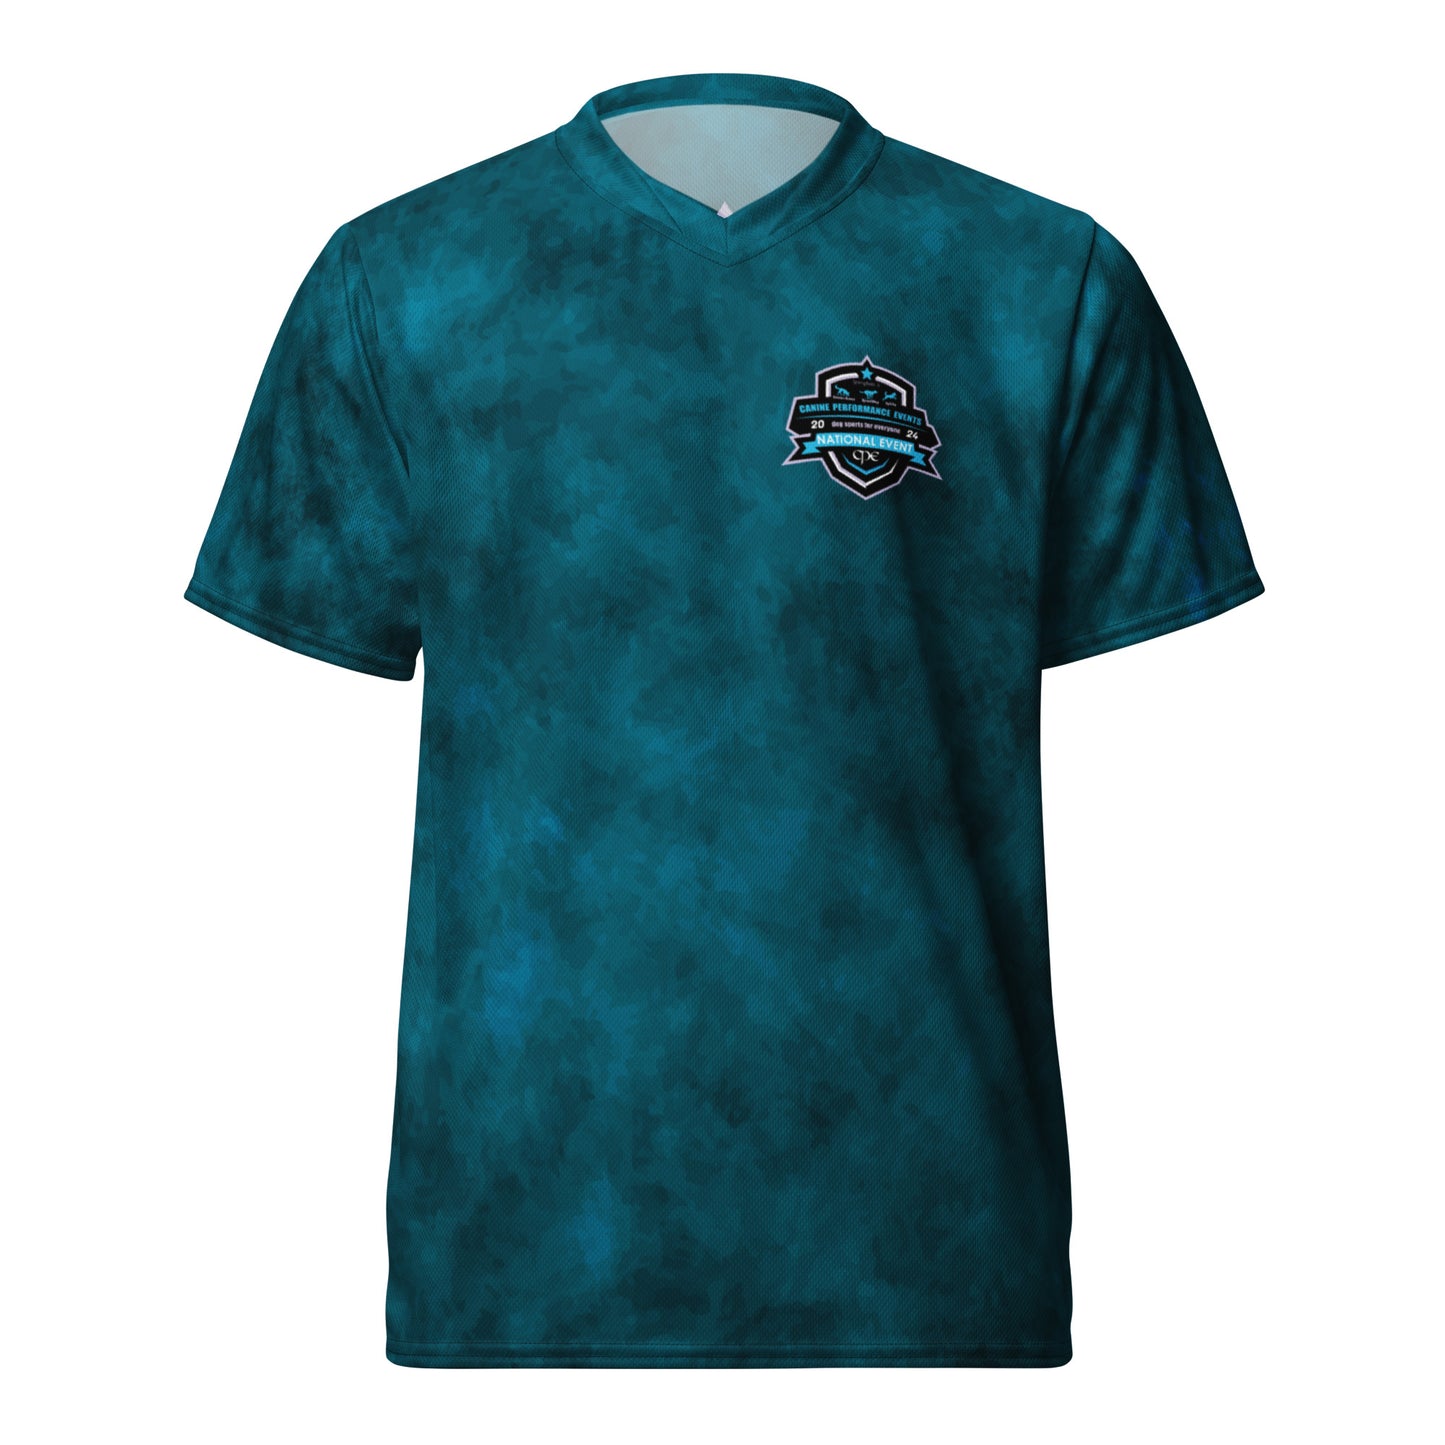 CPE NATIONALS POWDER Recycled unisex sports jersey